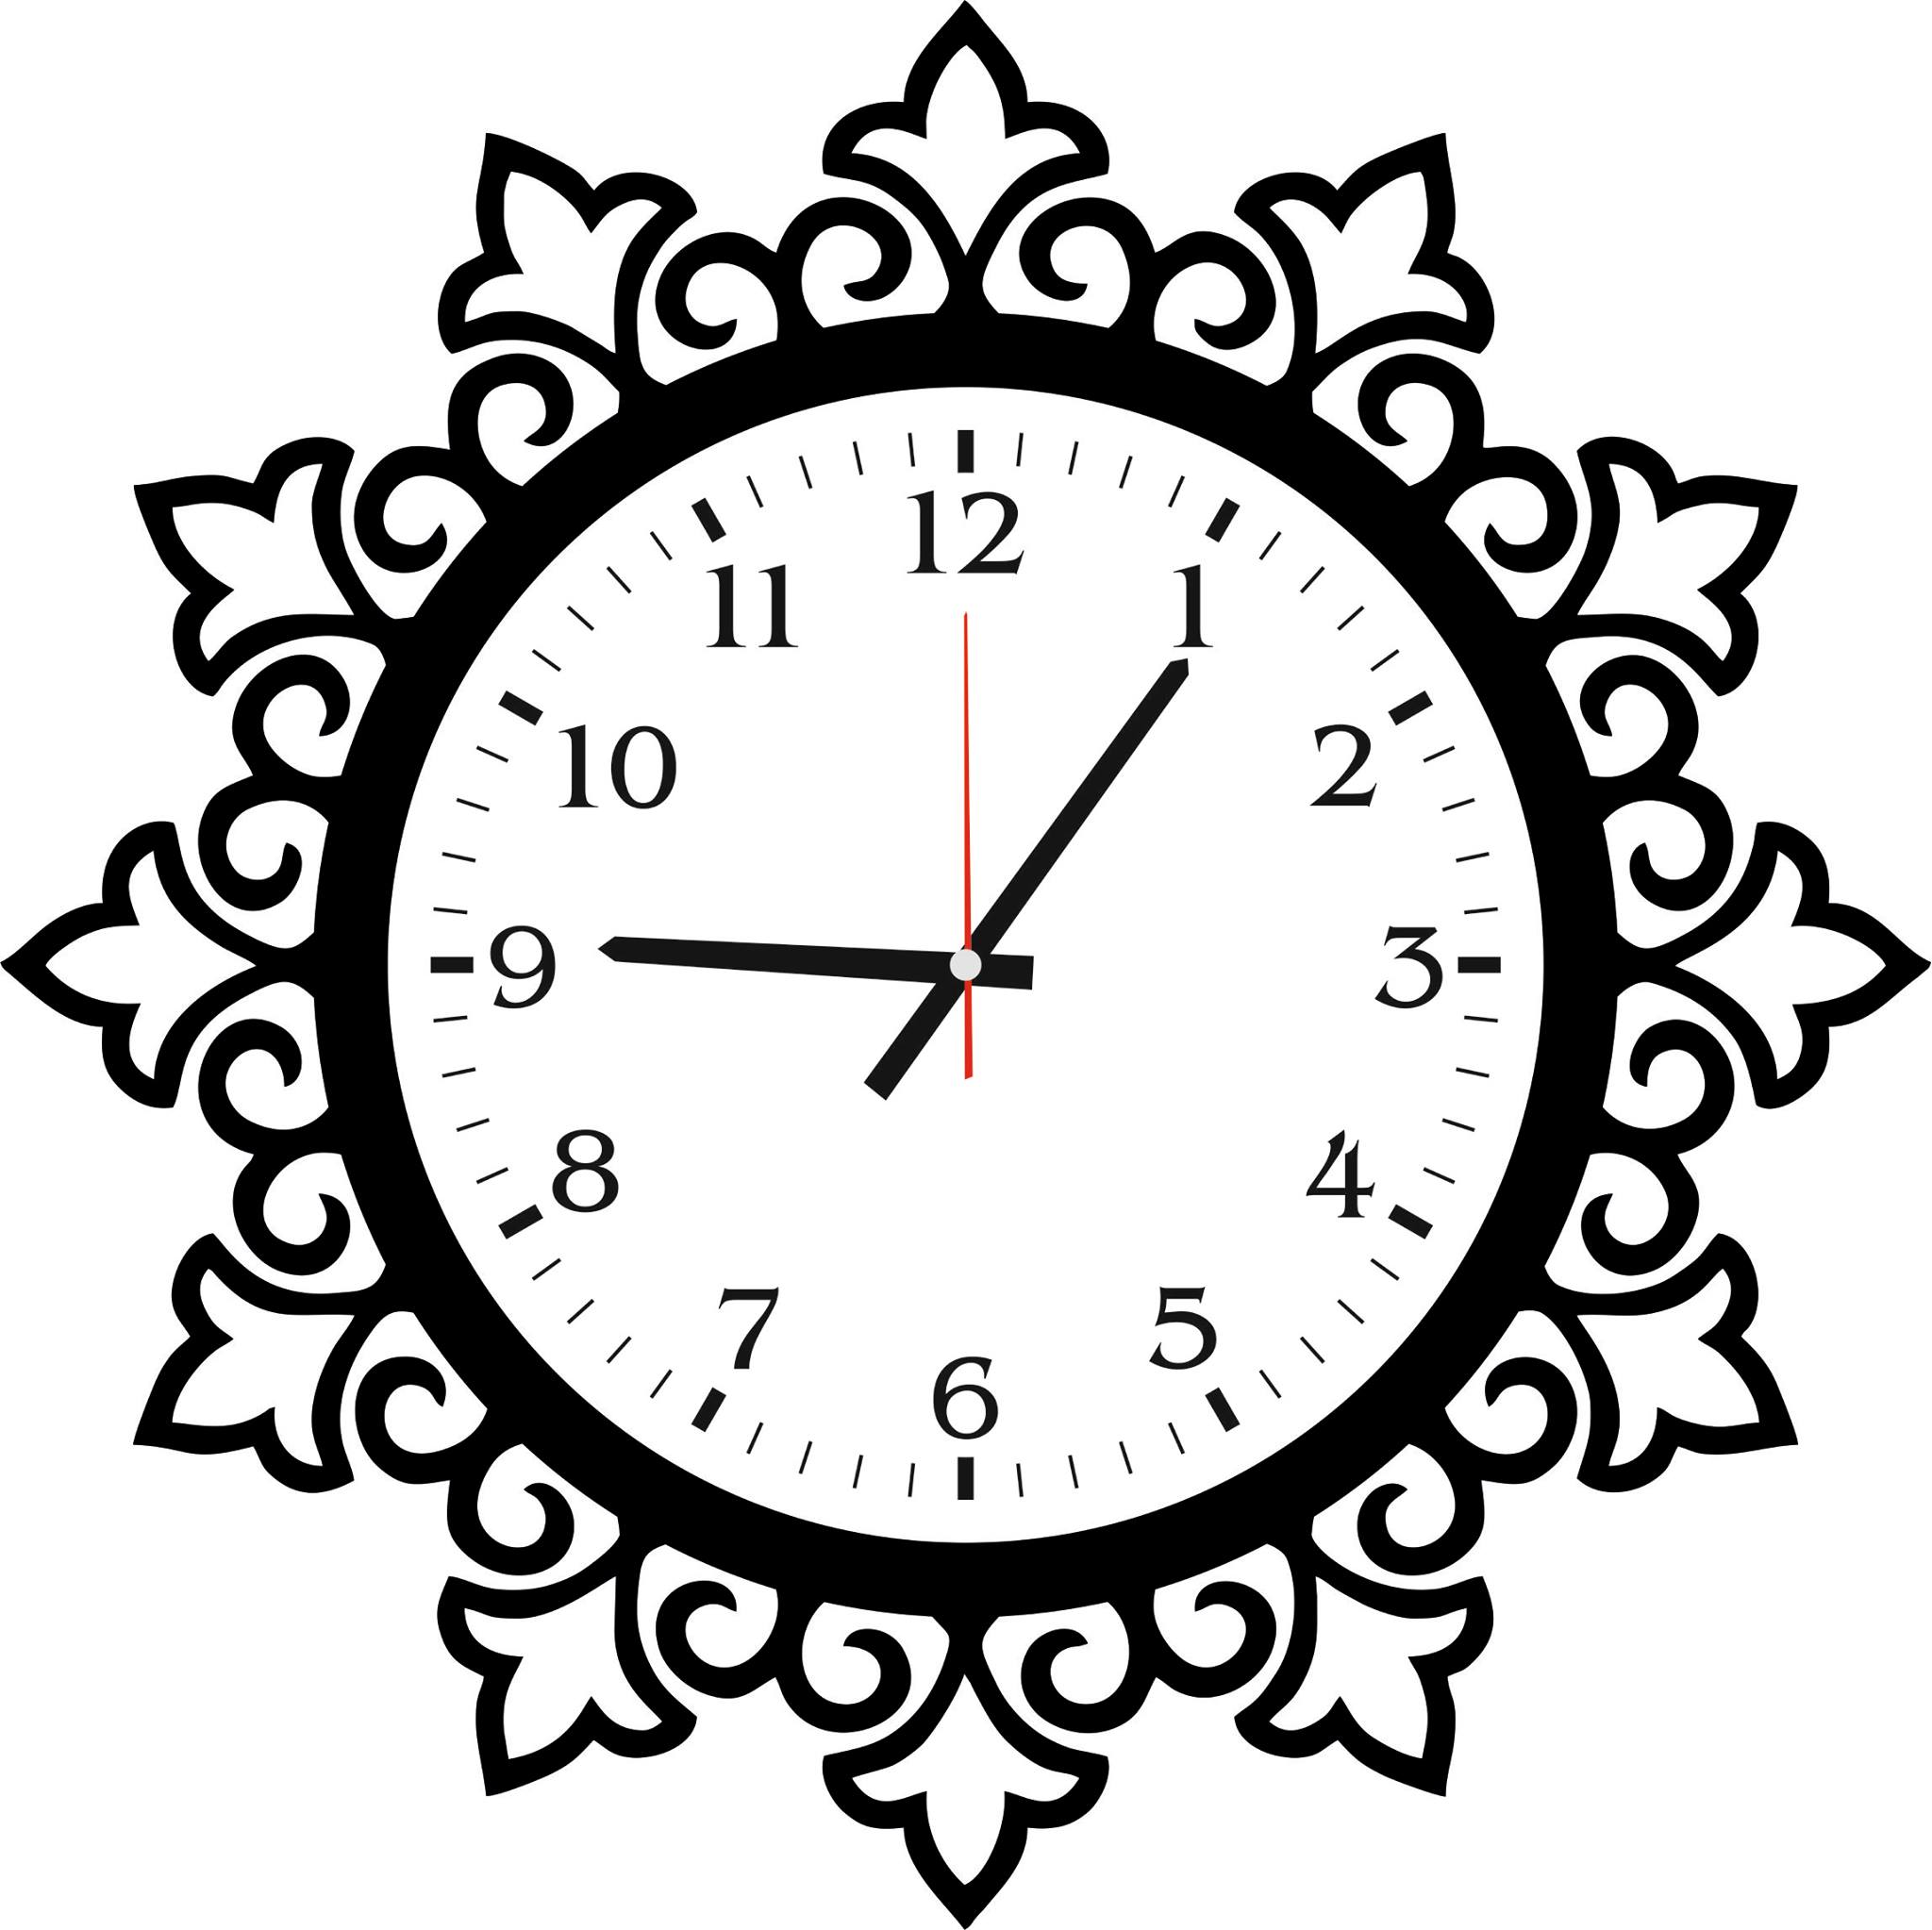 Retro style analog alarm clock, sketch vector illustration. Retro style  analog alarm clock, black and white sketch style | CanStock